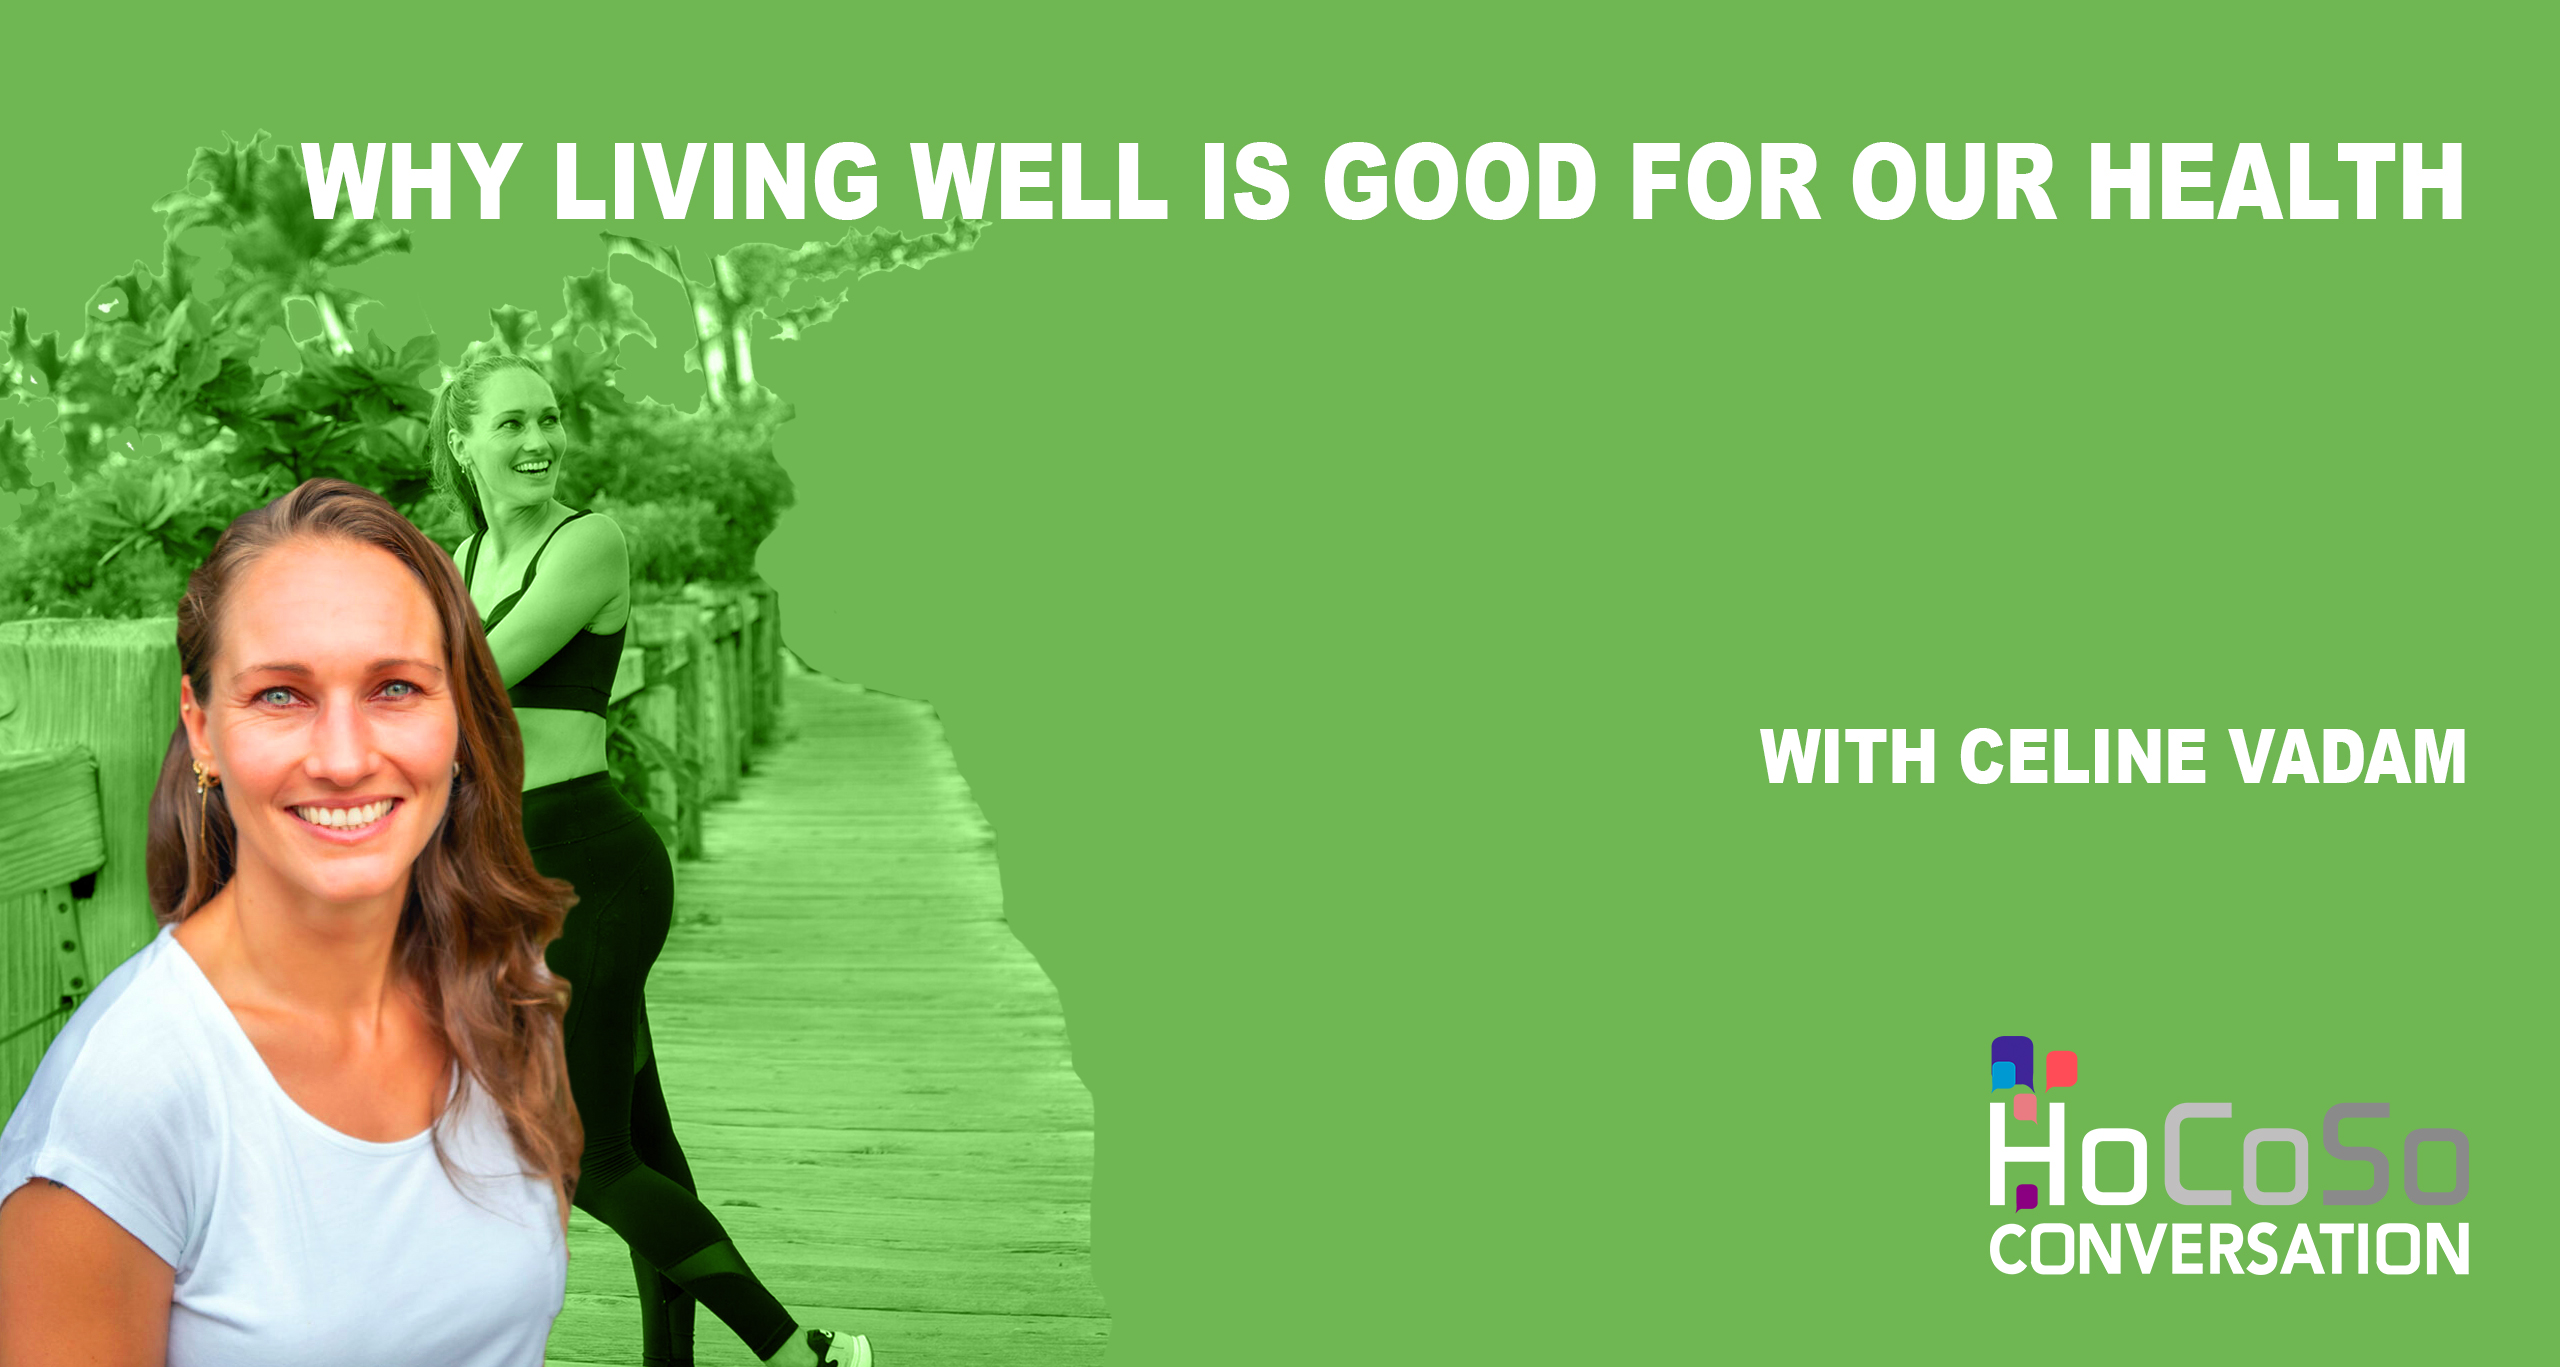 Why Living Well is Good for Our Health / Celine Vadam for the HoCoSo CONVERSATION